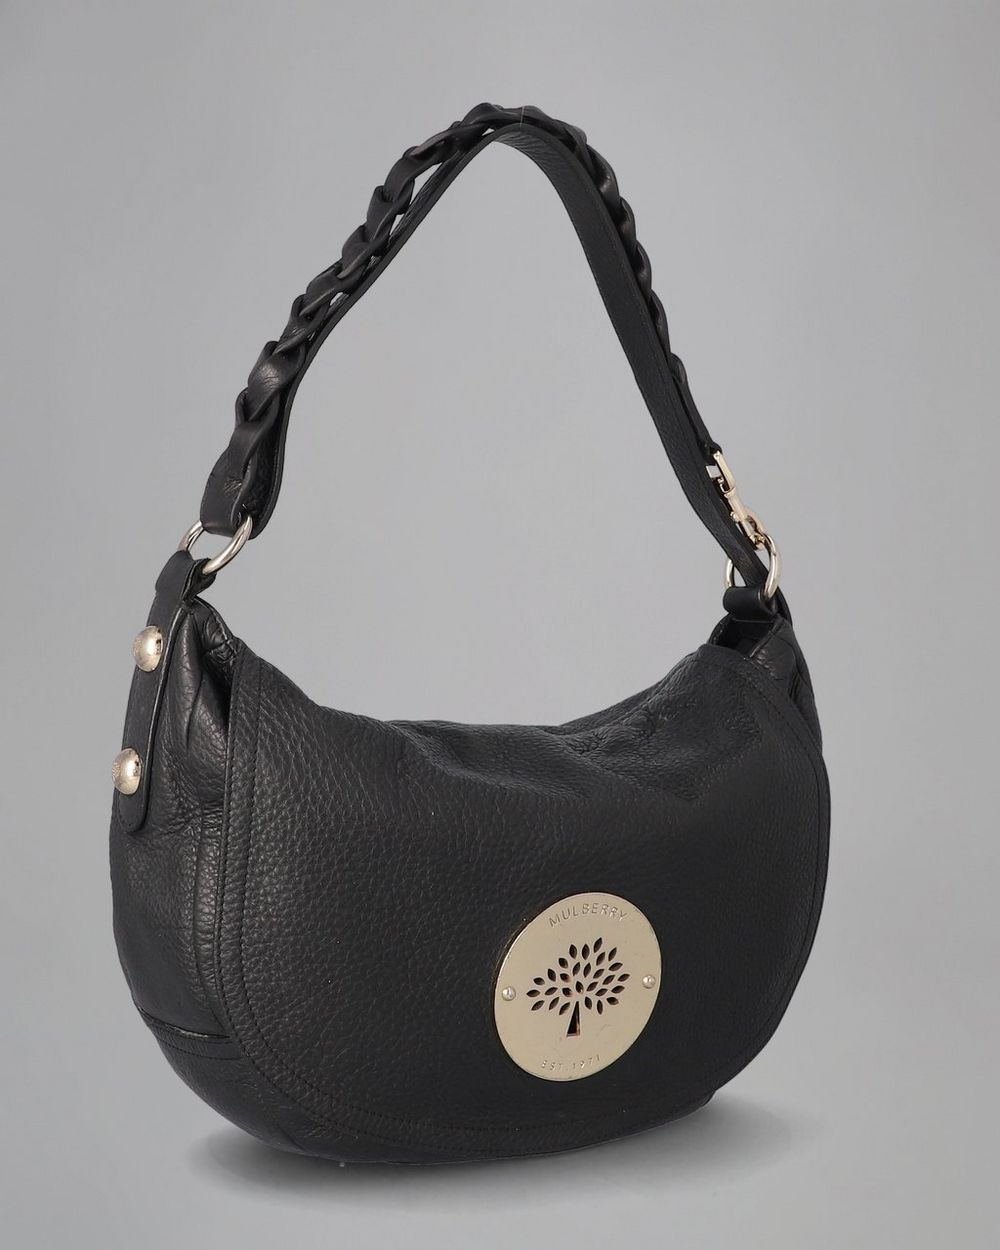 Mulberry Daria French Purse in Black